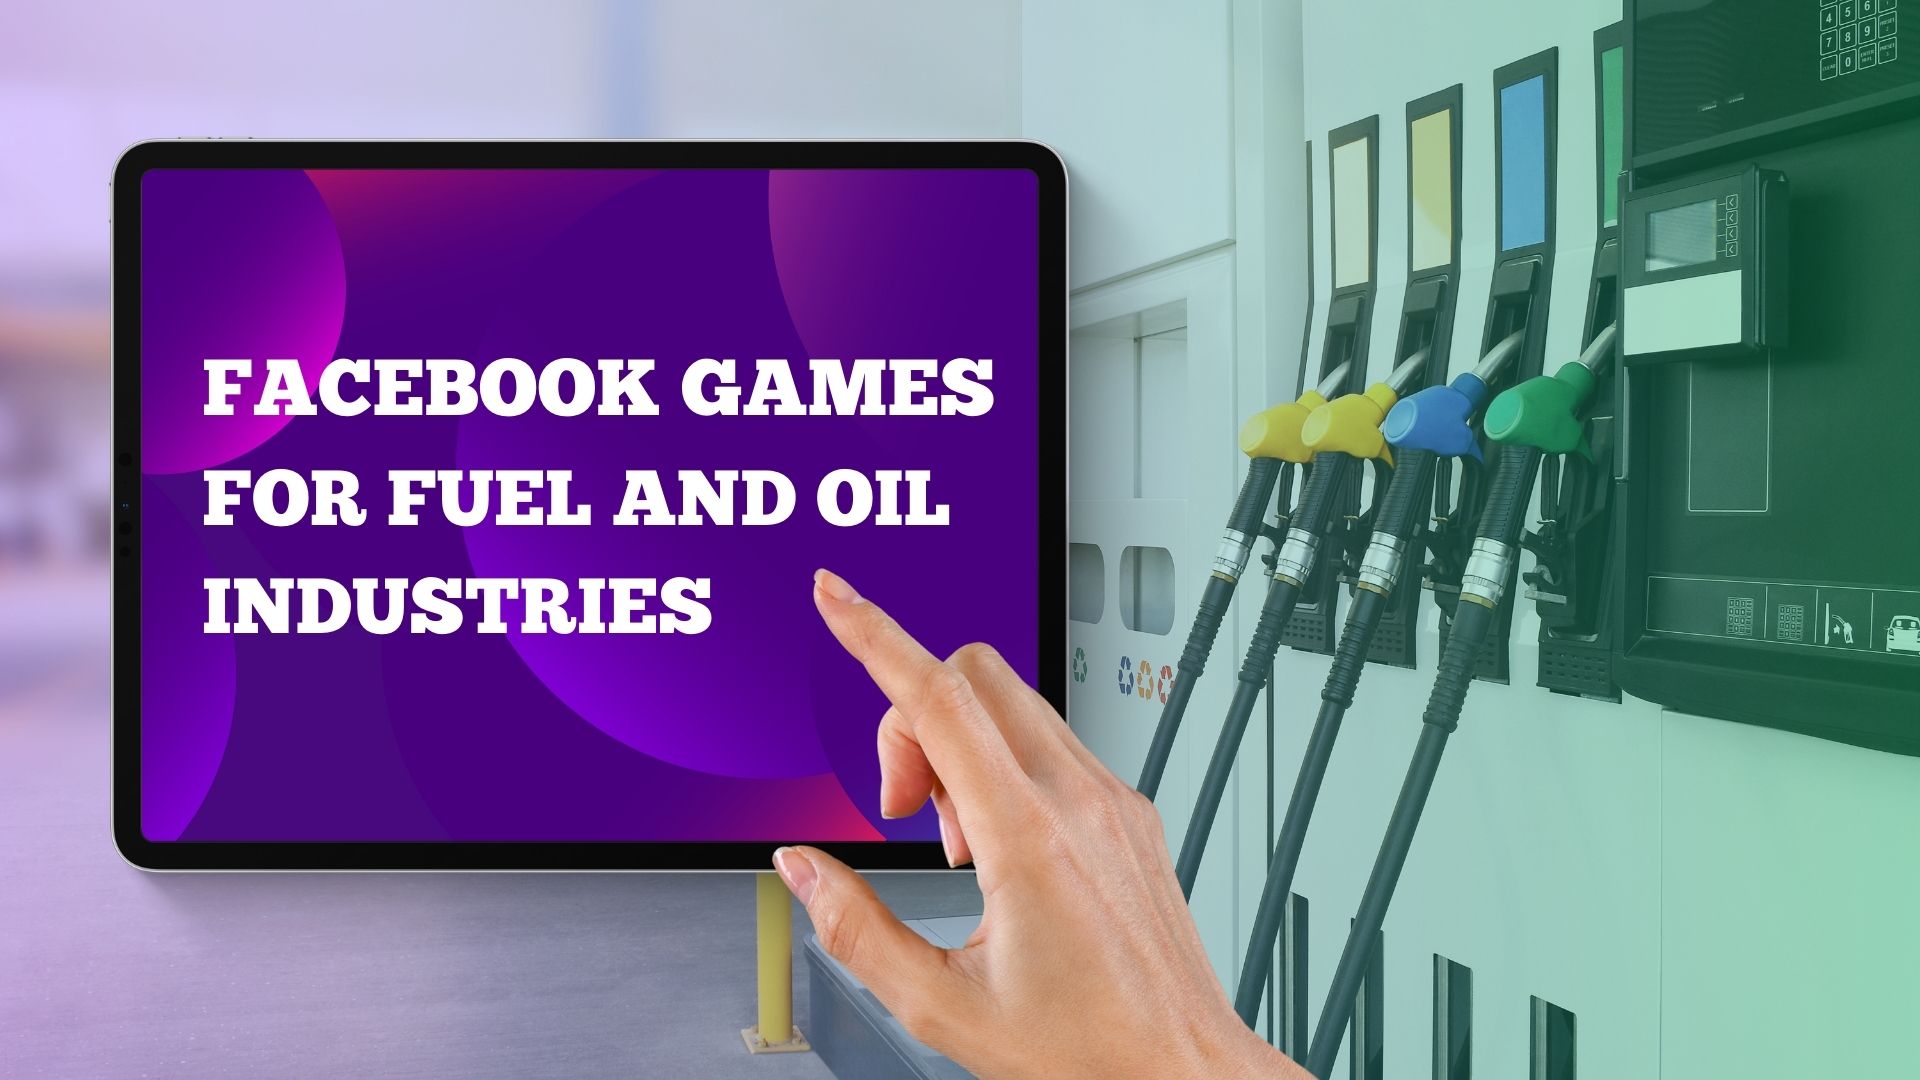 Facebook Games for Fuel and Oil Industries